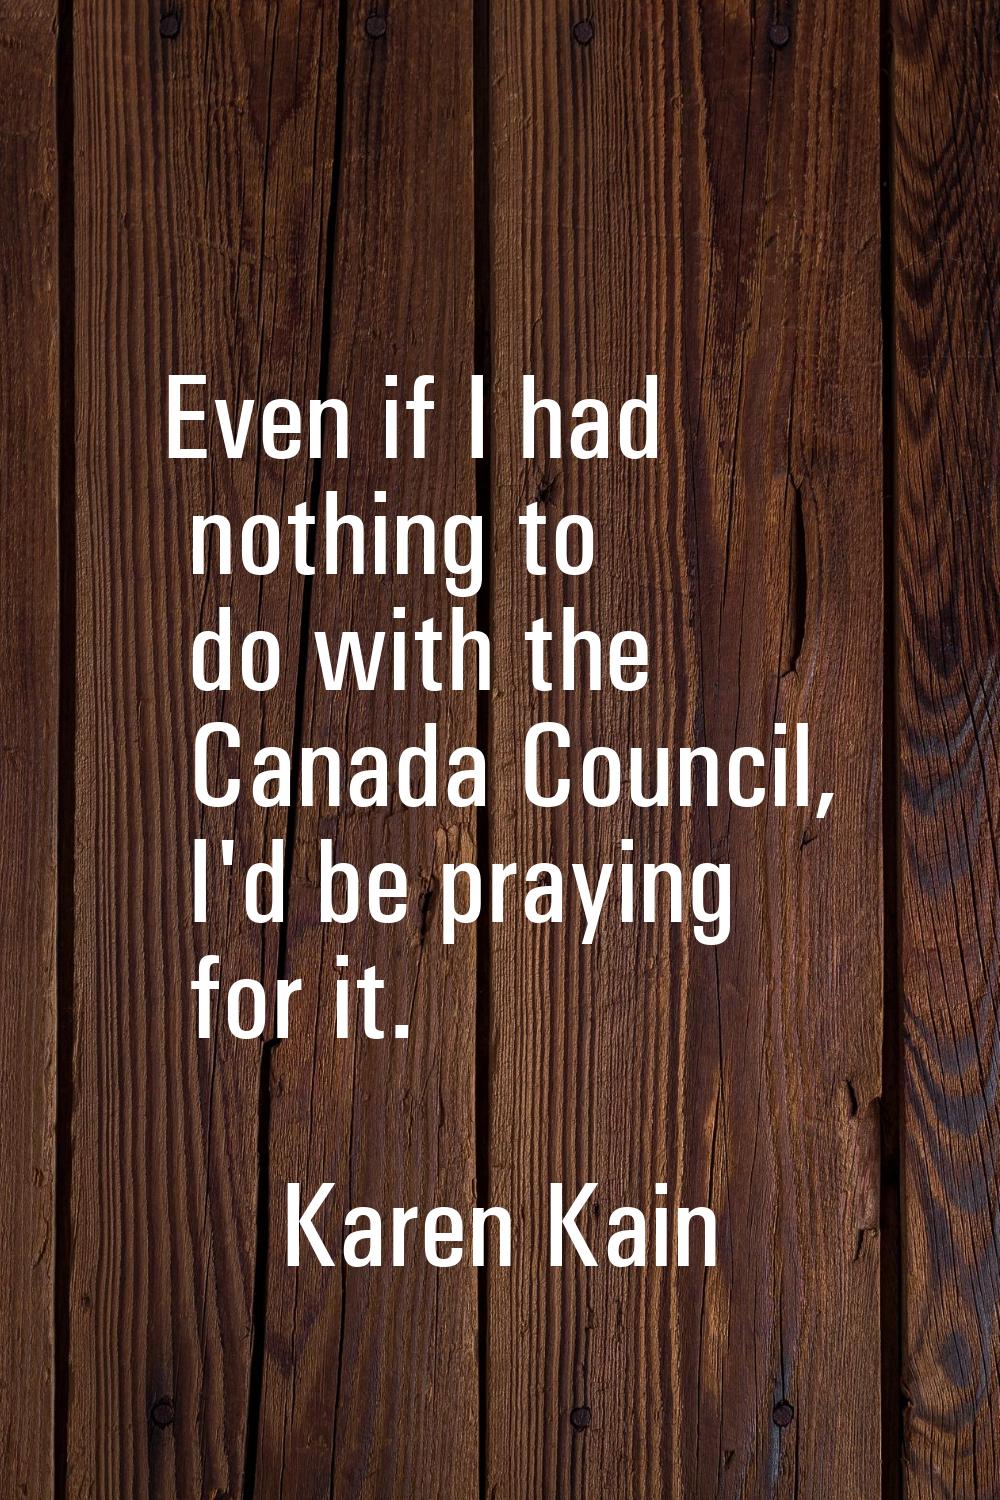 Even if I had nothing to do with the Canada Council, I'd be praying for it.